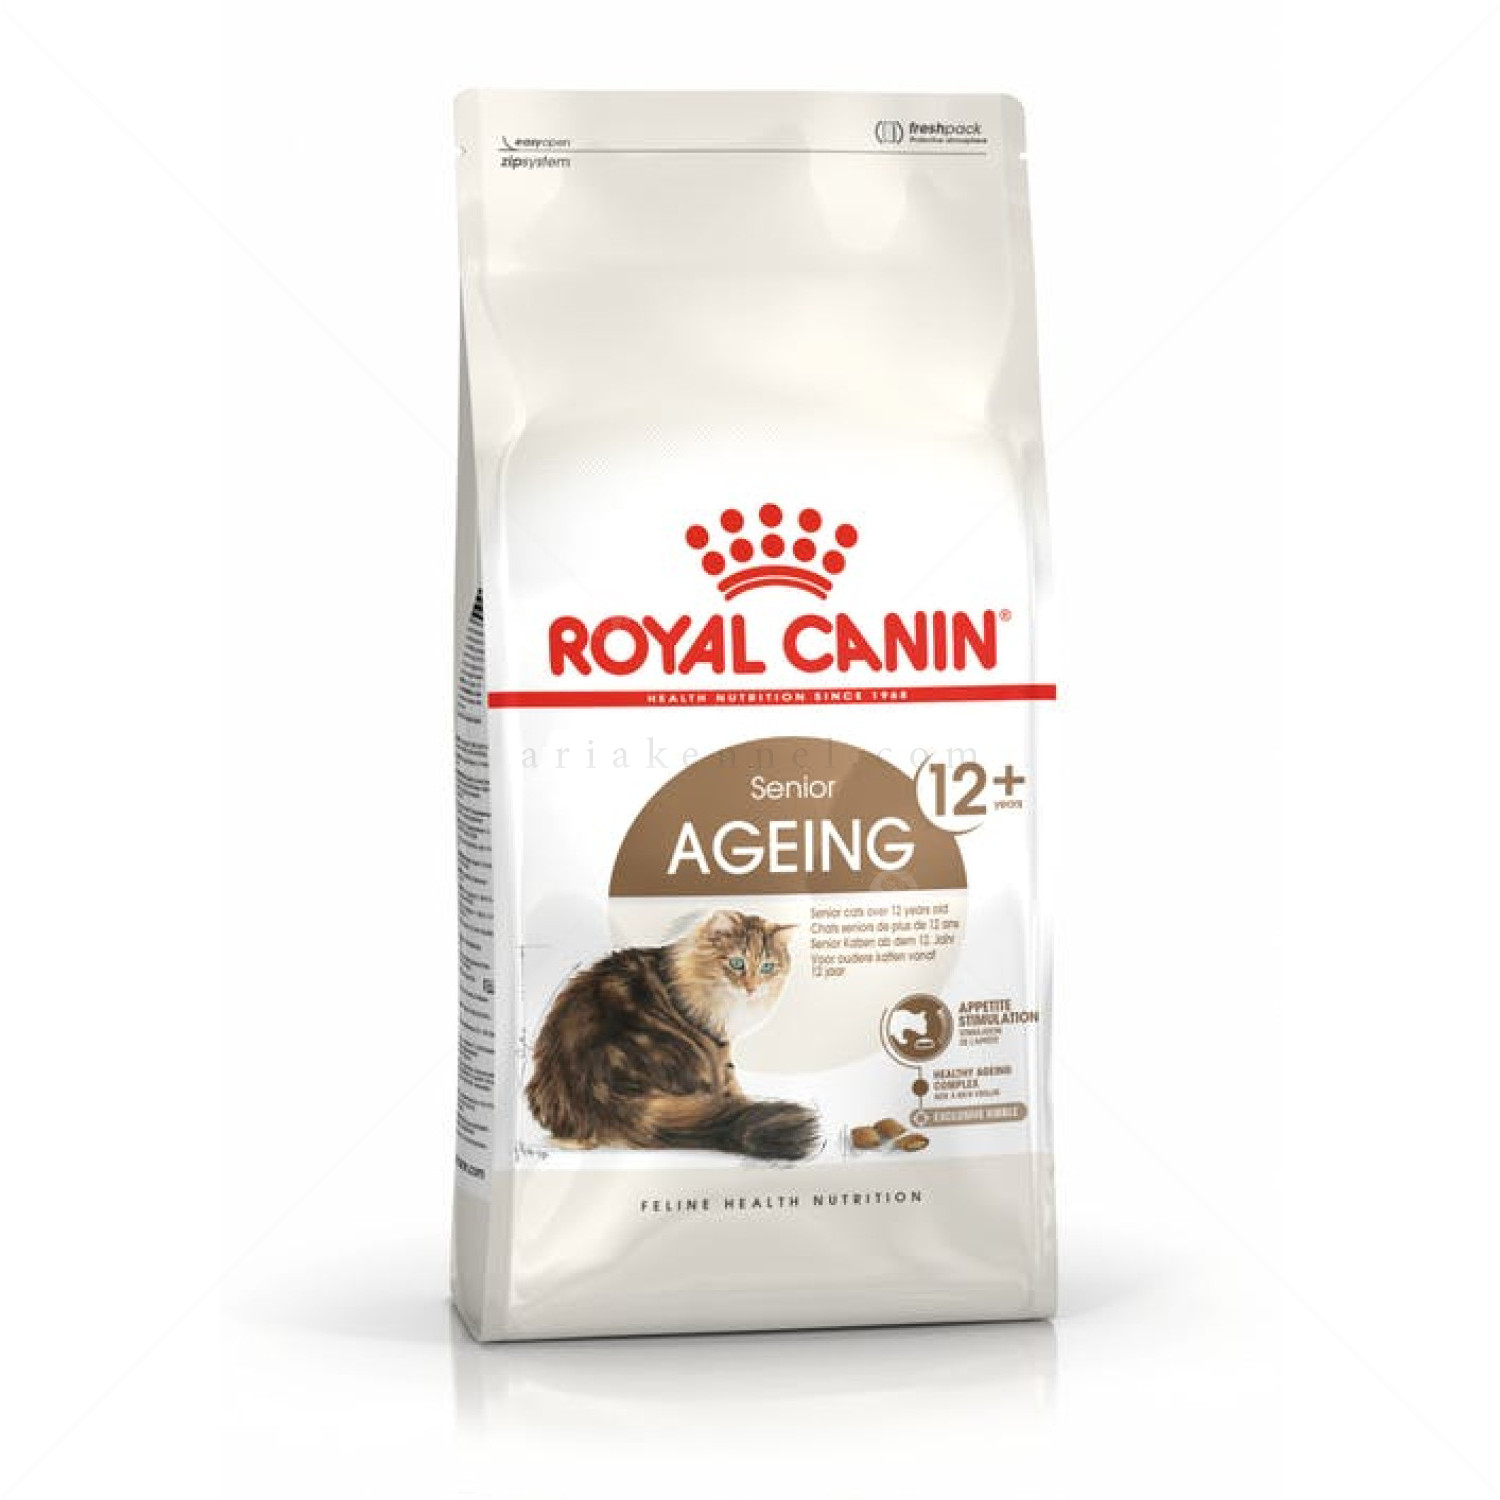 ROYAL CANIN 4 кг. Ageing 12+